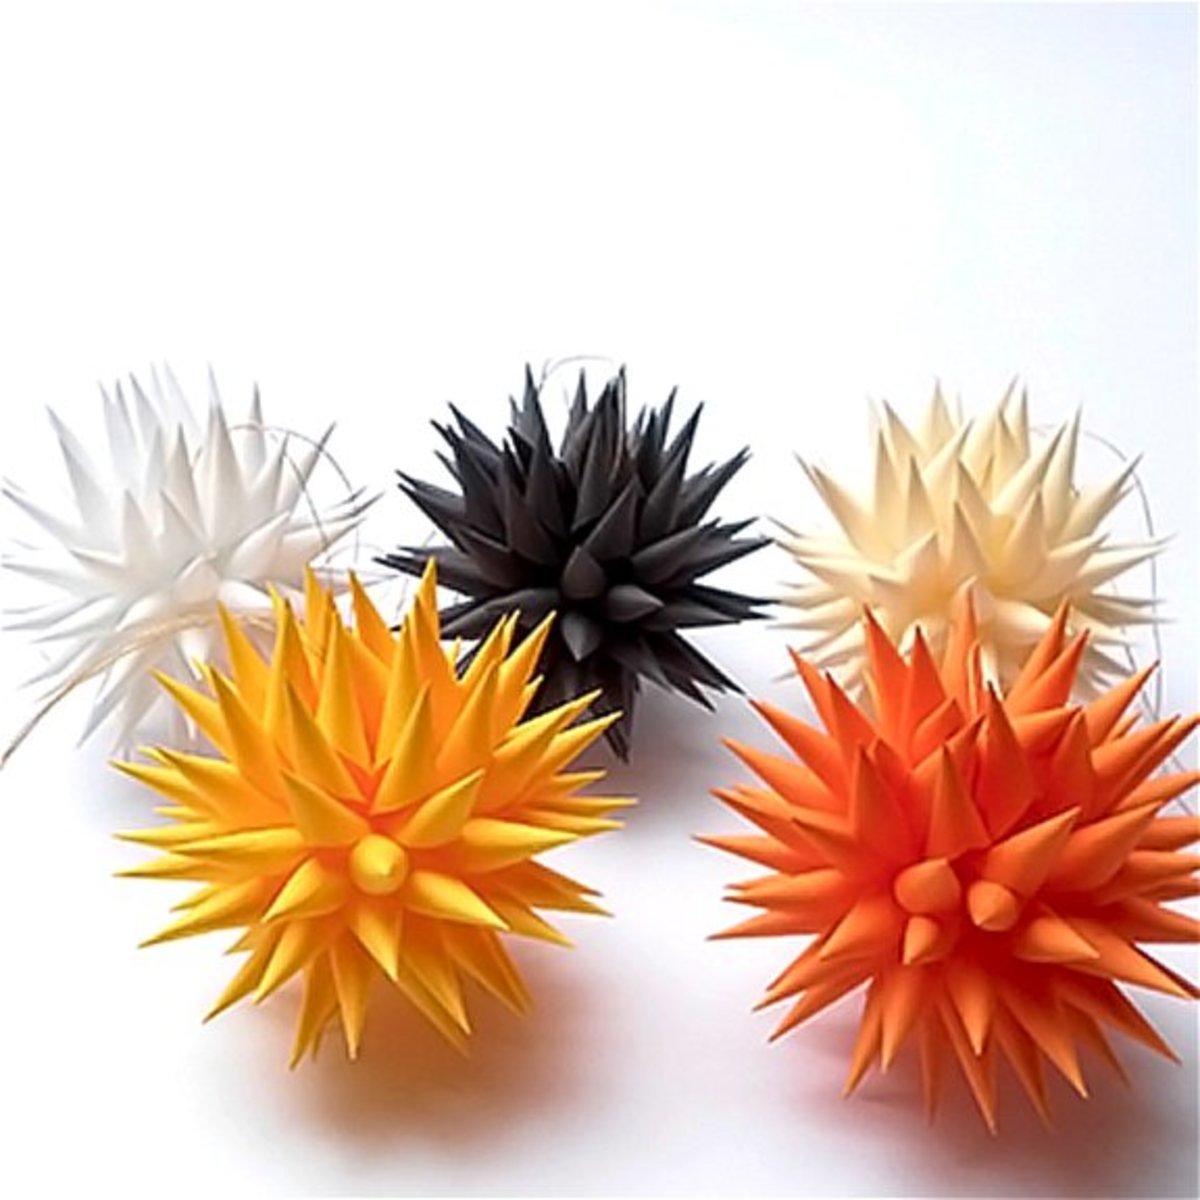 Dress up your Christmas tree with cheerful 3D sunburst ornaments.